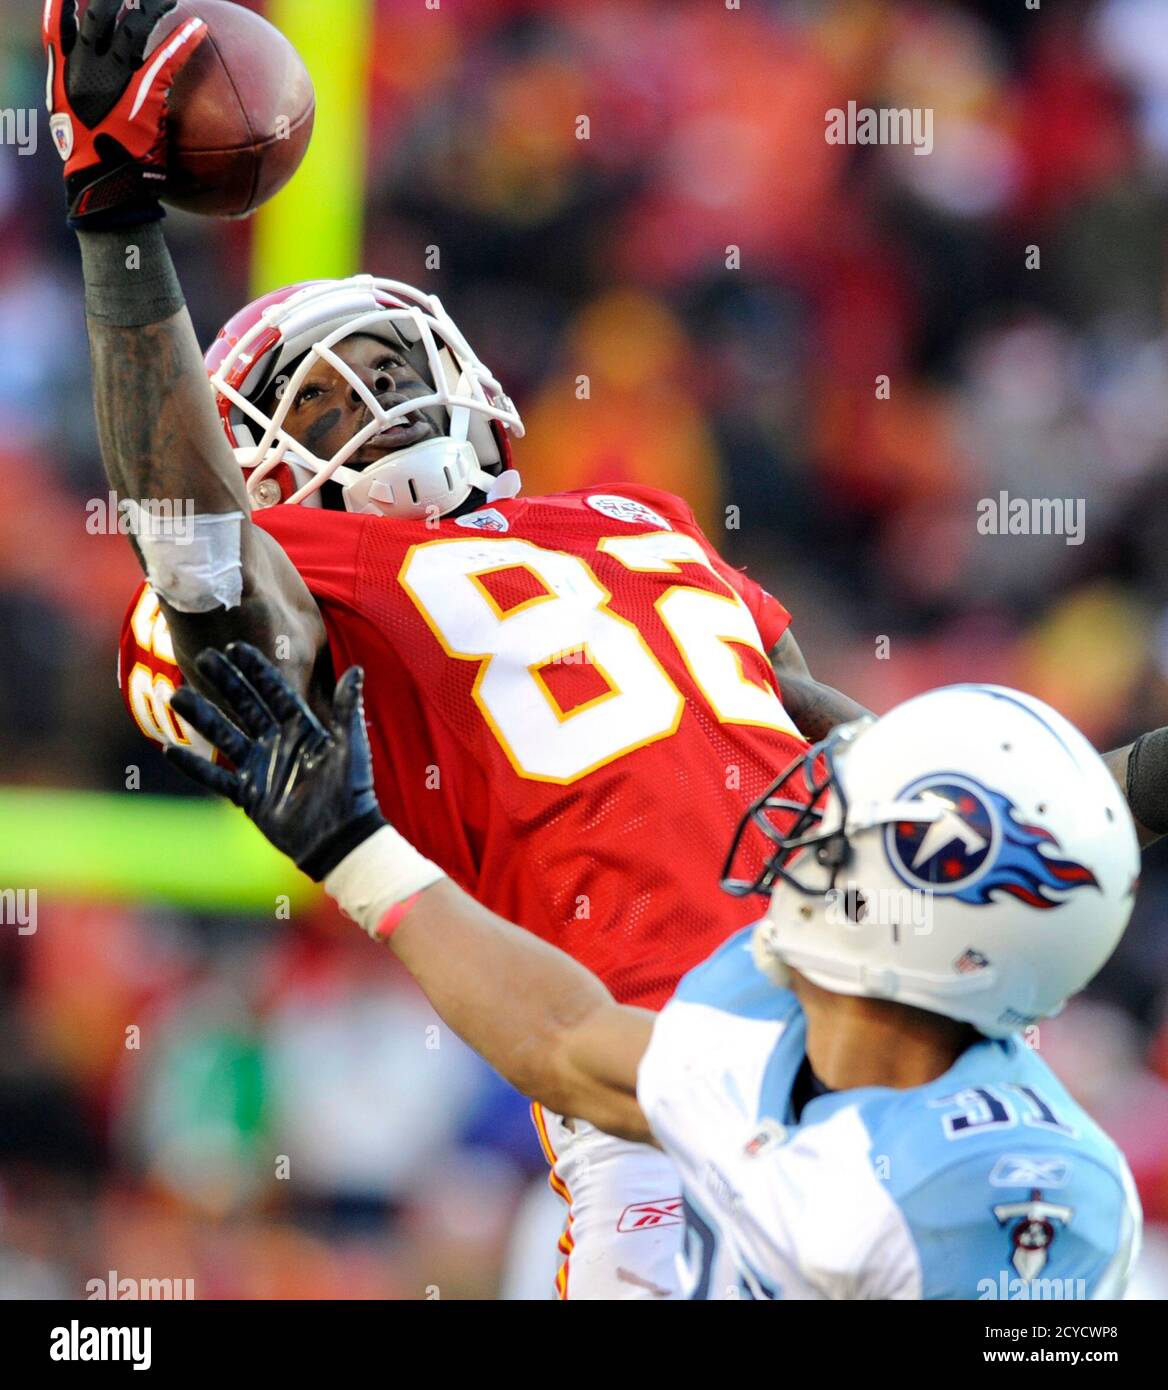 Kansas City Chiefs wide receiver Dwayne Bowe (L) makes a one-handed catch over Tennessee Titans cornerback Cortland Finnegan during the second half of the Chiefs' wn in their NFL football game at Arrowhead Stadium in Kansas City, Missouri December 26, 2010. REUTERS/Dave Kaup (UNITED STATES - Tags: SPORT FOOTBALL) Stock Photo